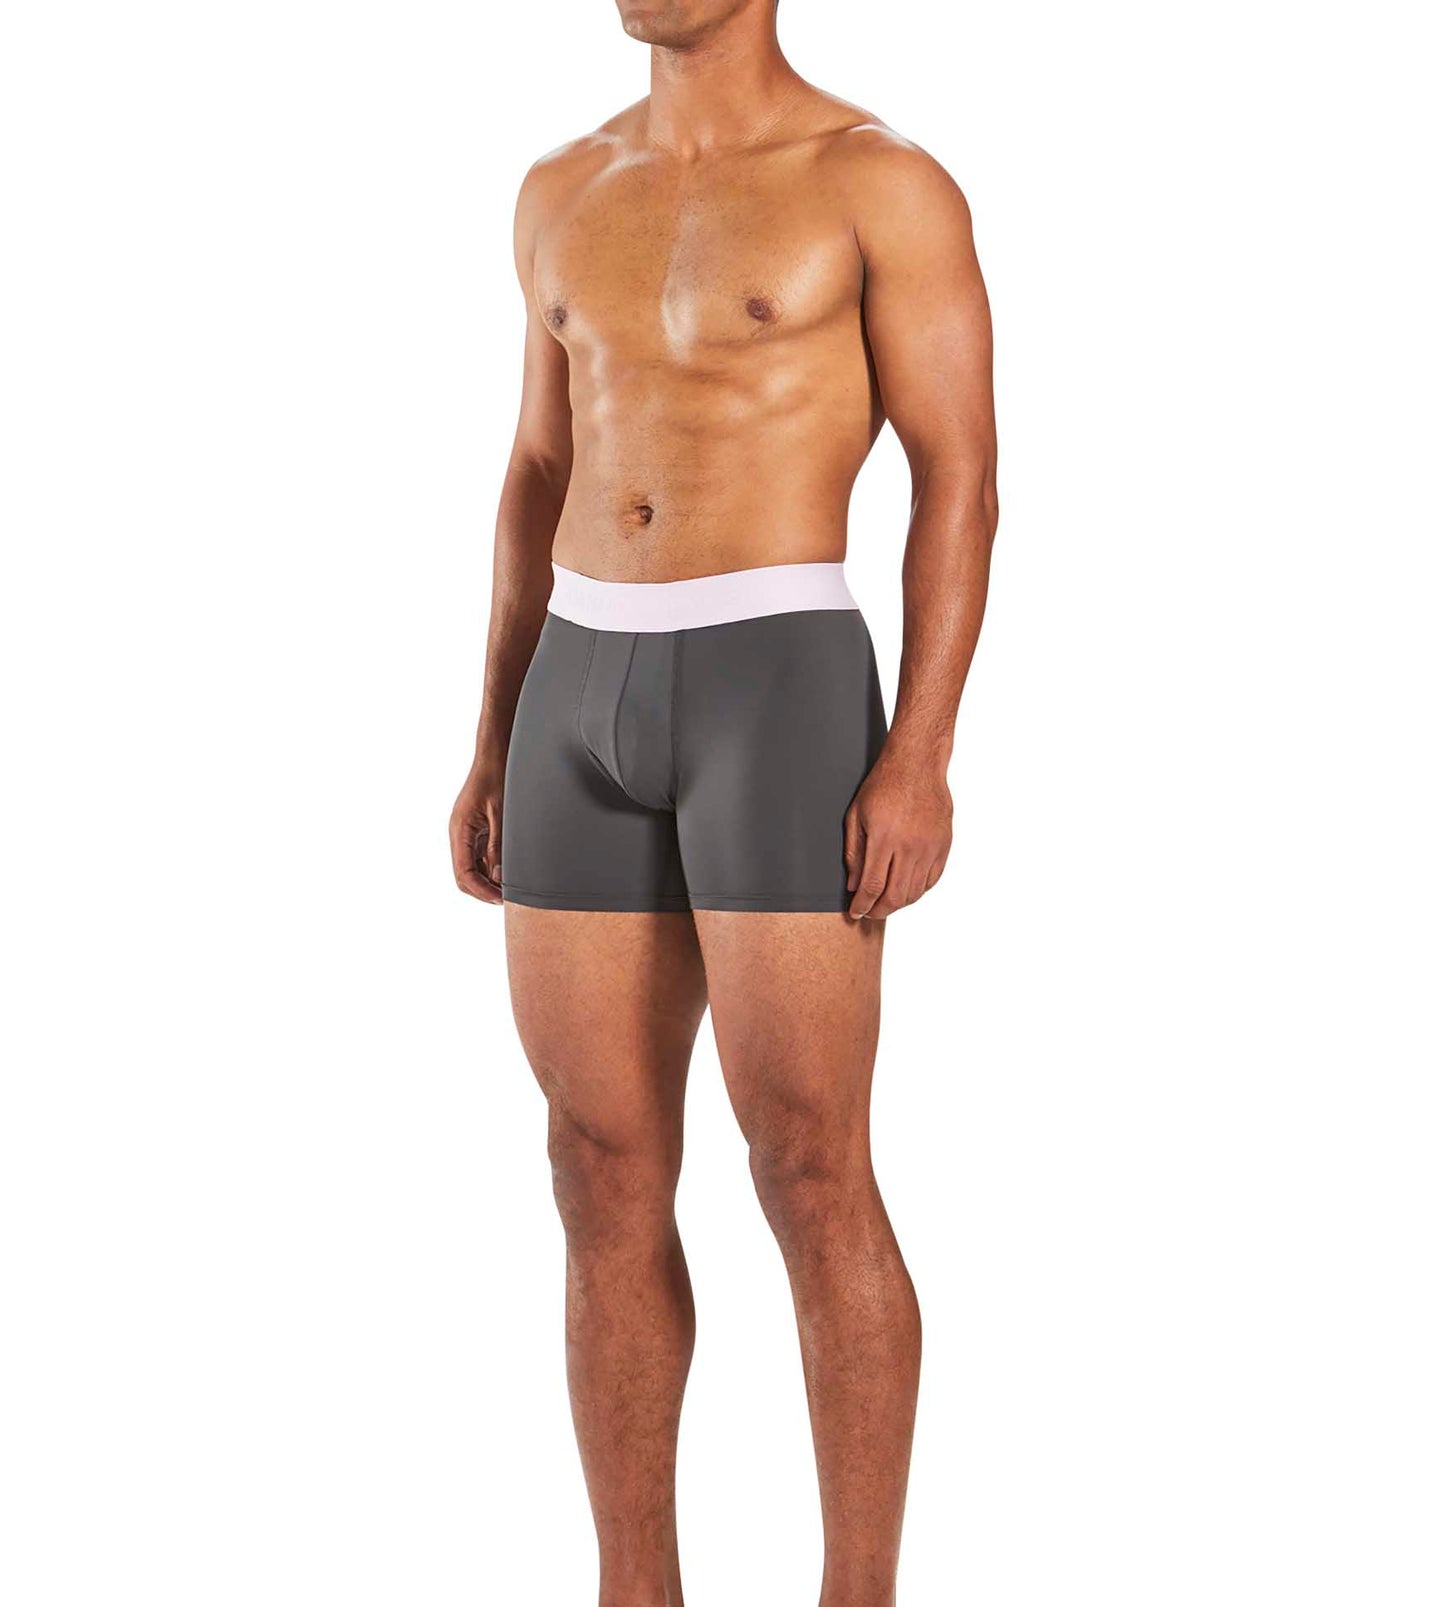 Hustle Boxer Brief 2 Pack colors contain: Sienna, Dark salmon, Dark slate gray, Tan, Dark slate gray, Indian red, Sienna, Misty rose, Dim gray